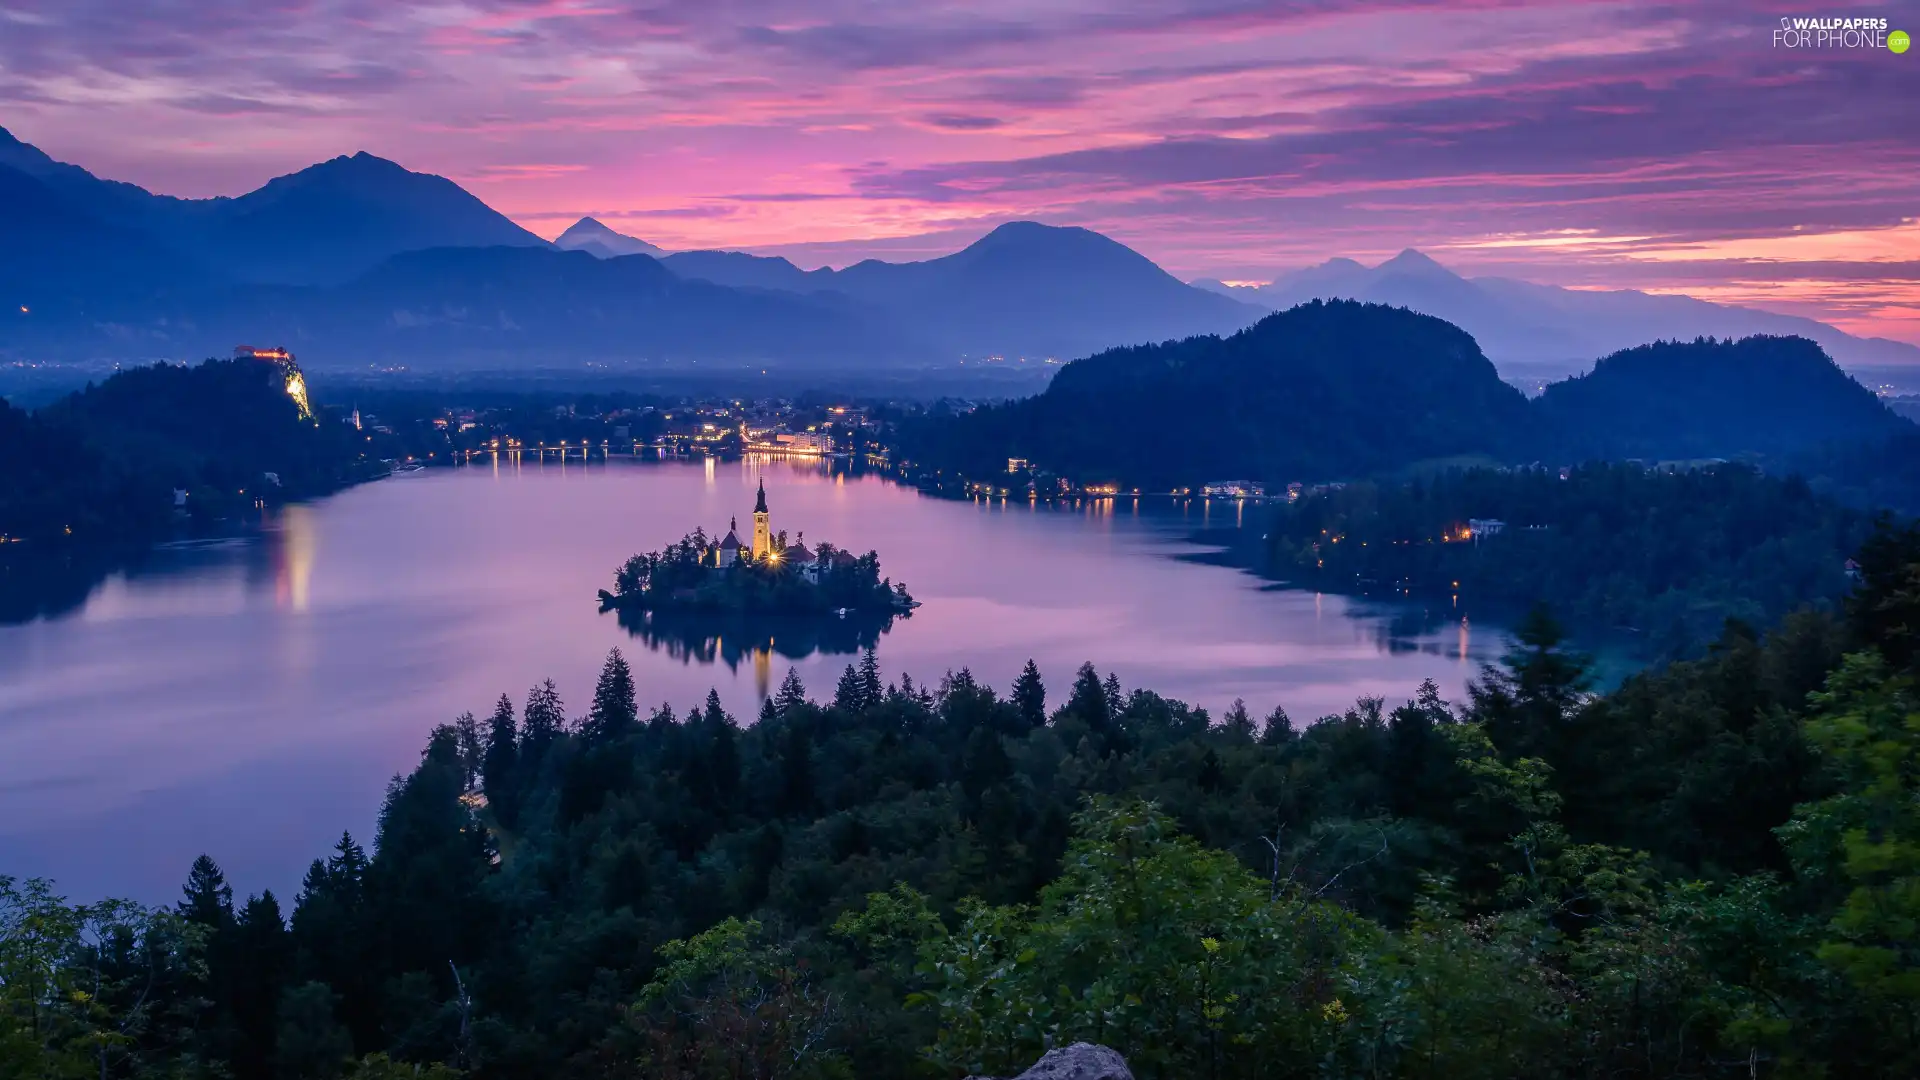 Lake Bled, Blejski Otok Island, Church of the Assumption of the Virgin Mary, Mountains, clouds, Slovenia, viewes, Sunrise, trees